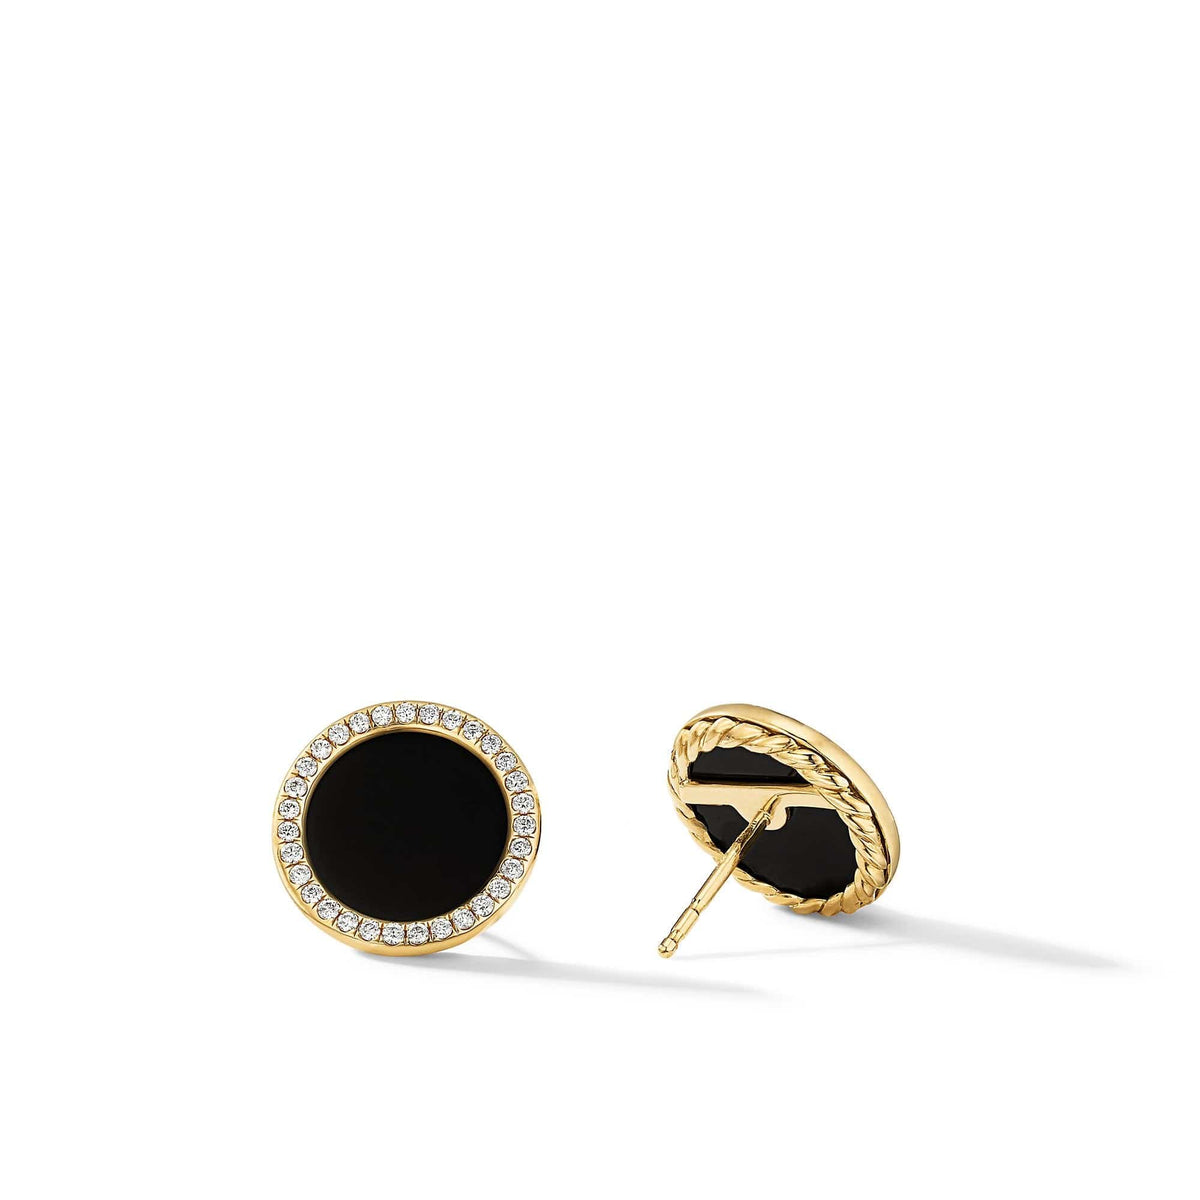 DY Elements Button Stud Earrings in 18K Yellow Gold with Black Onyx and Pavé Diamonds